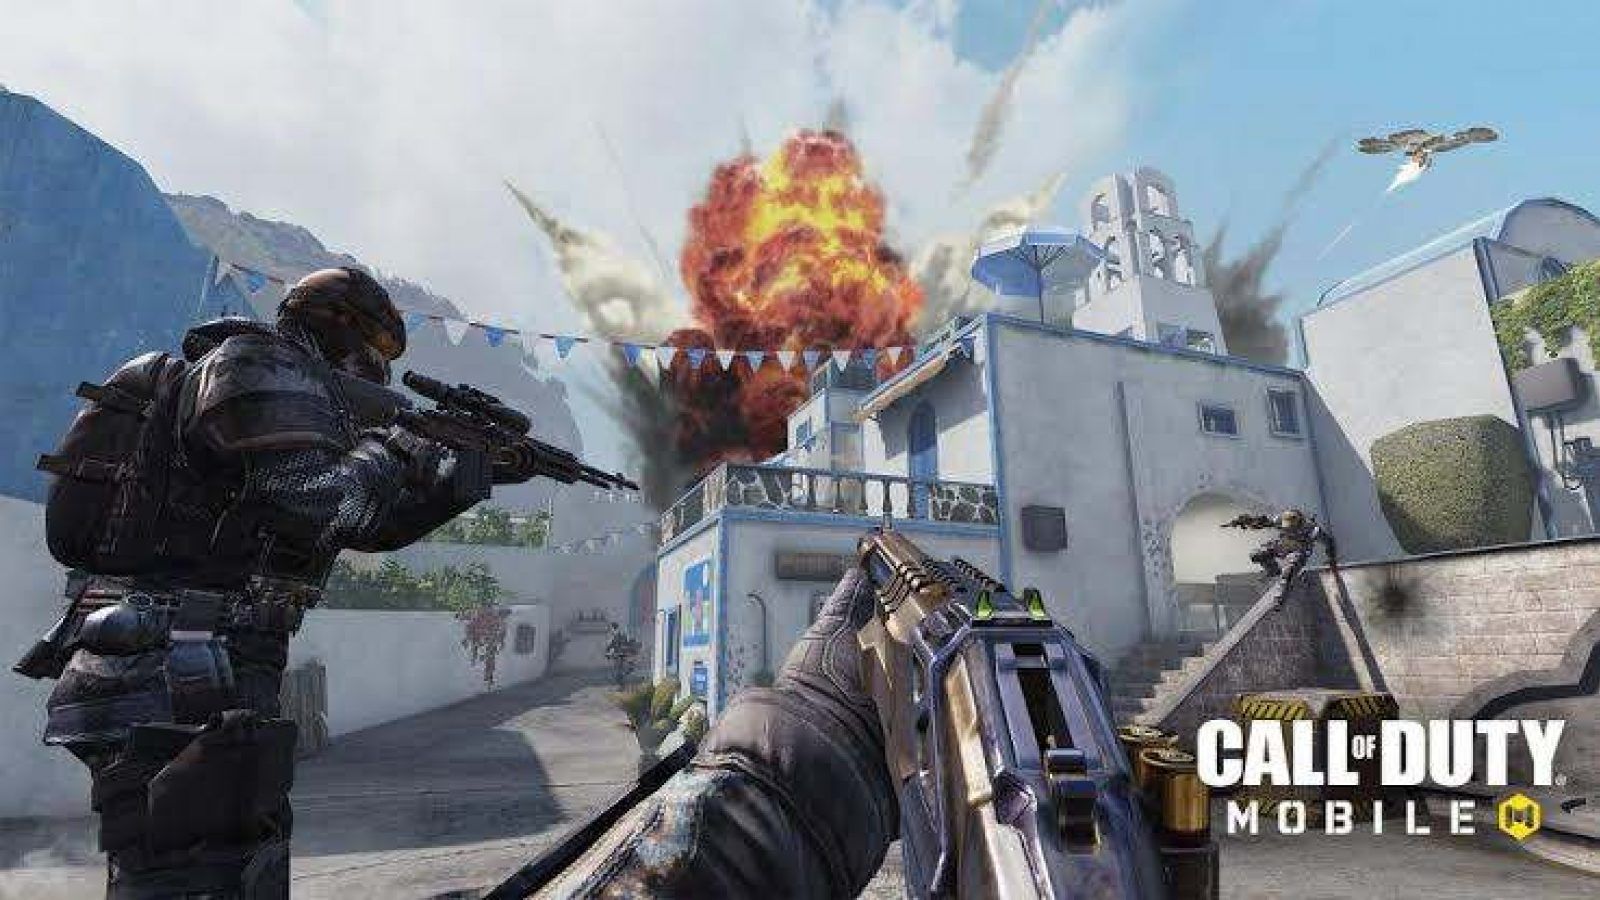 How to play Call of Duty Mobile on PC with a mouse and keyboard